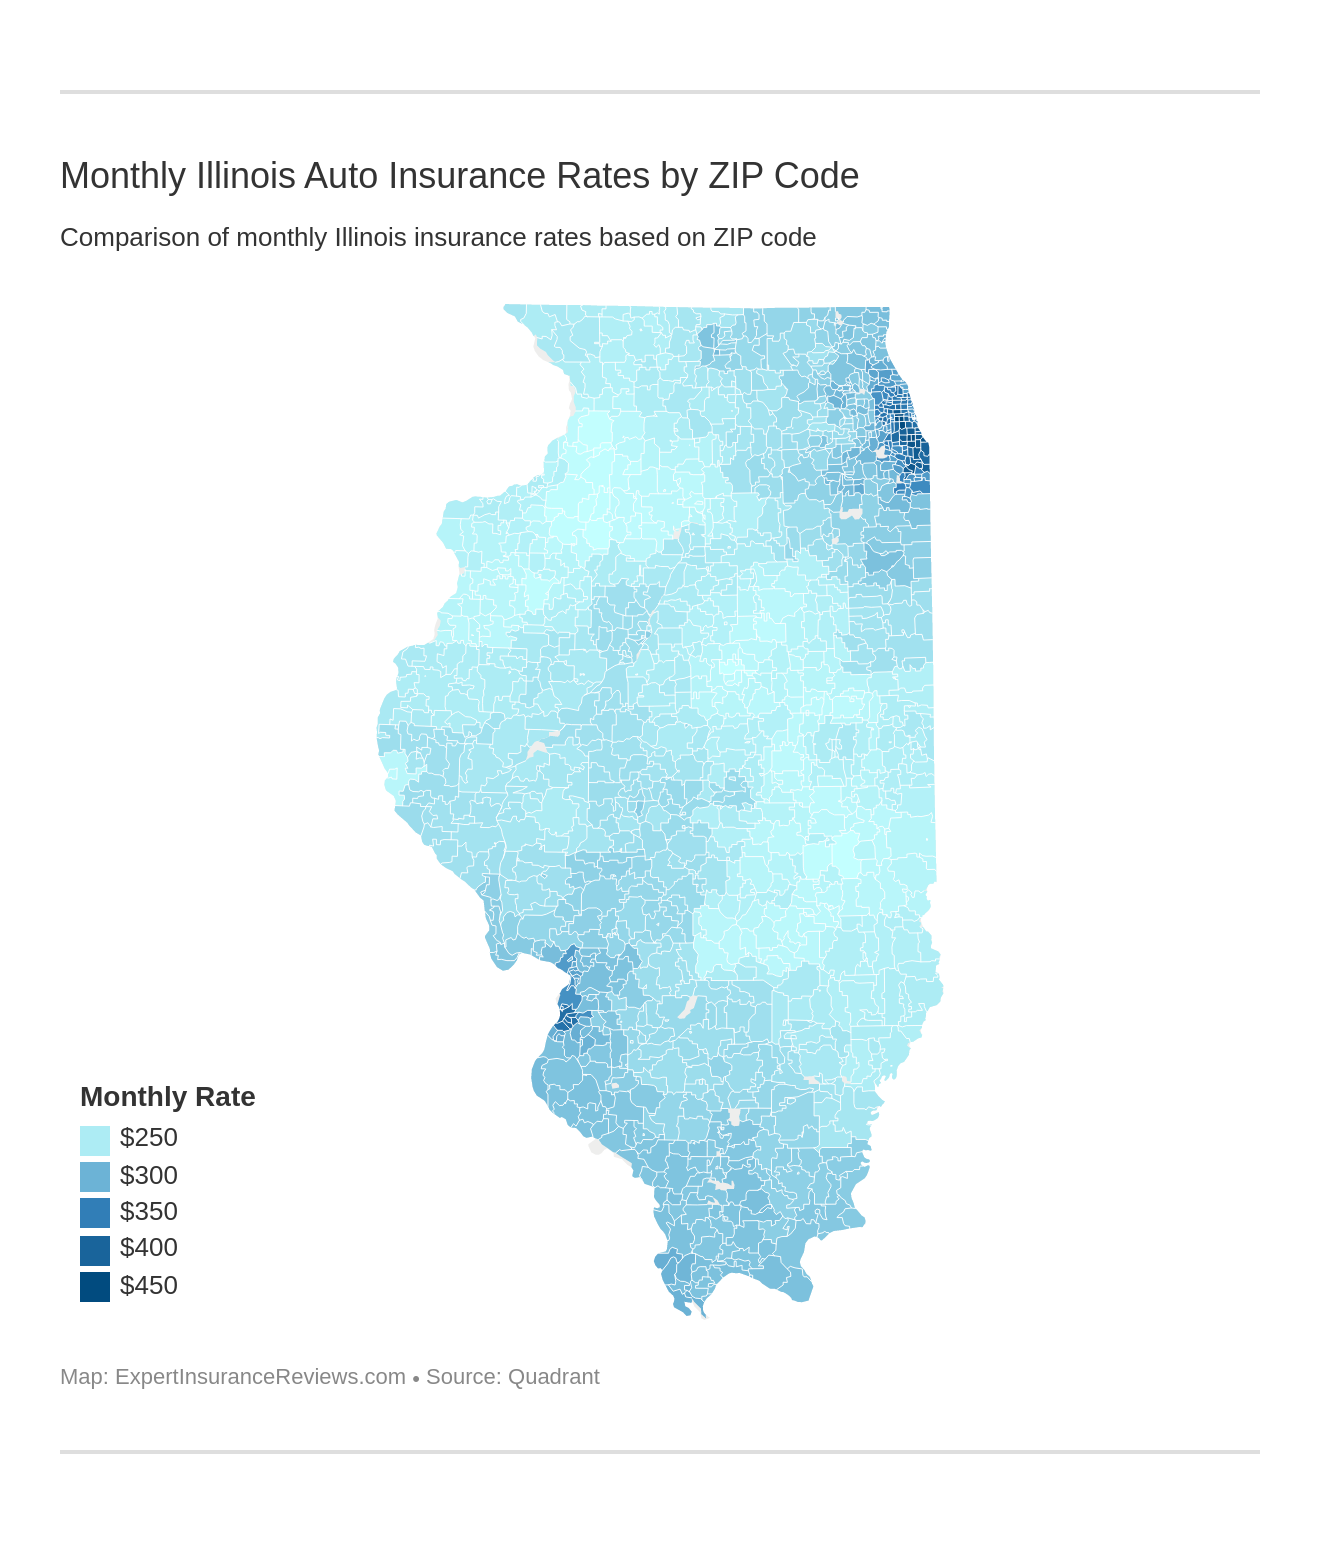 Monthly Illinois Auto Insurance Rates by ZIP Code